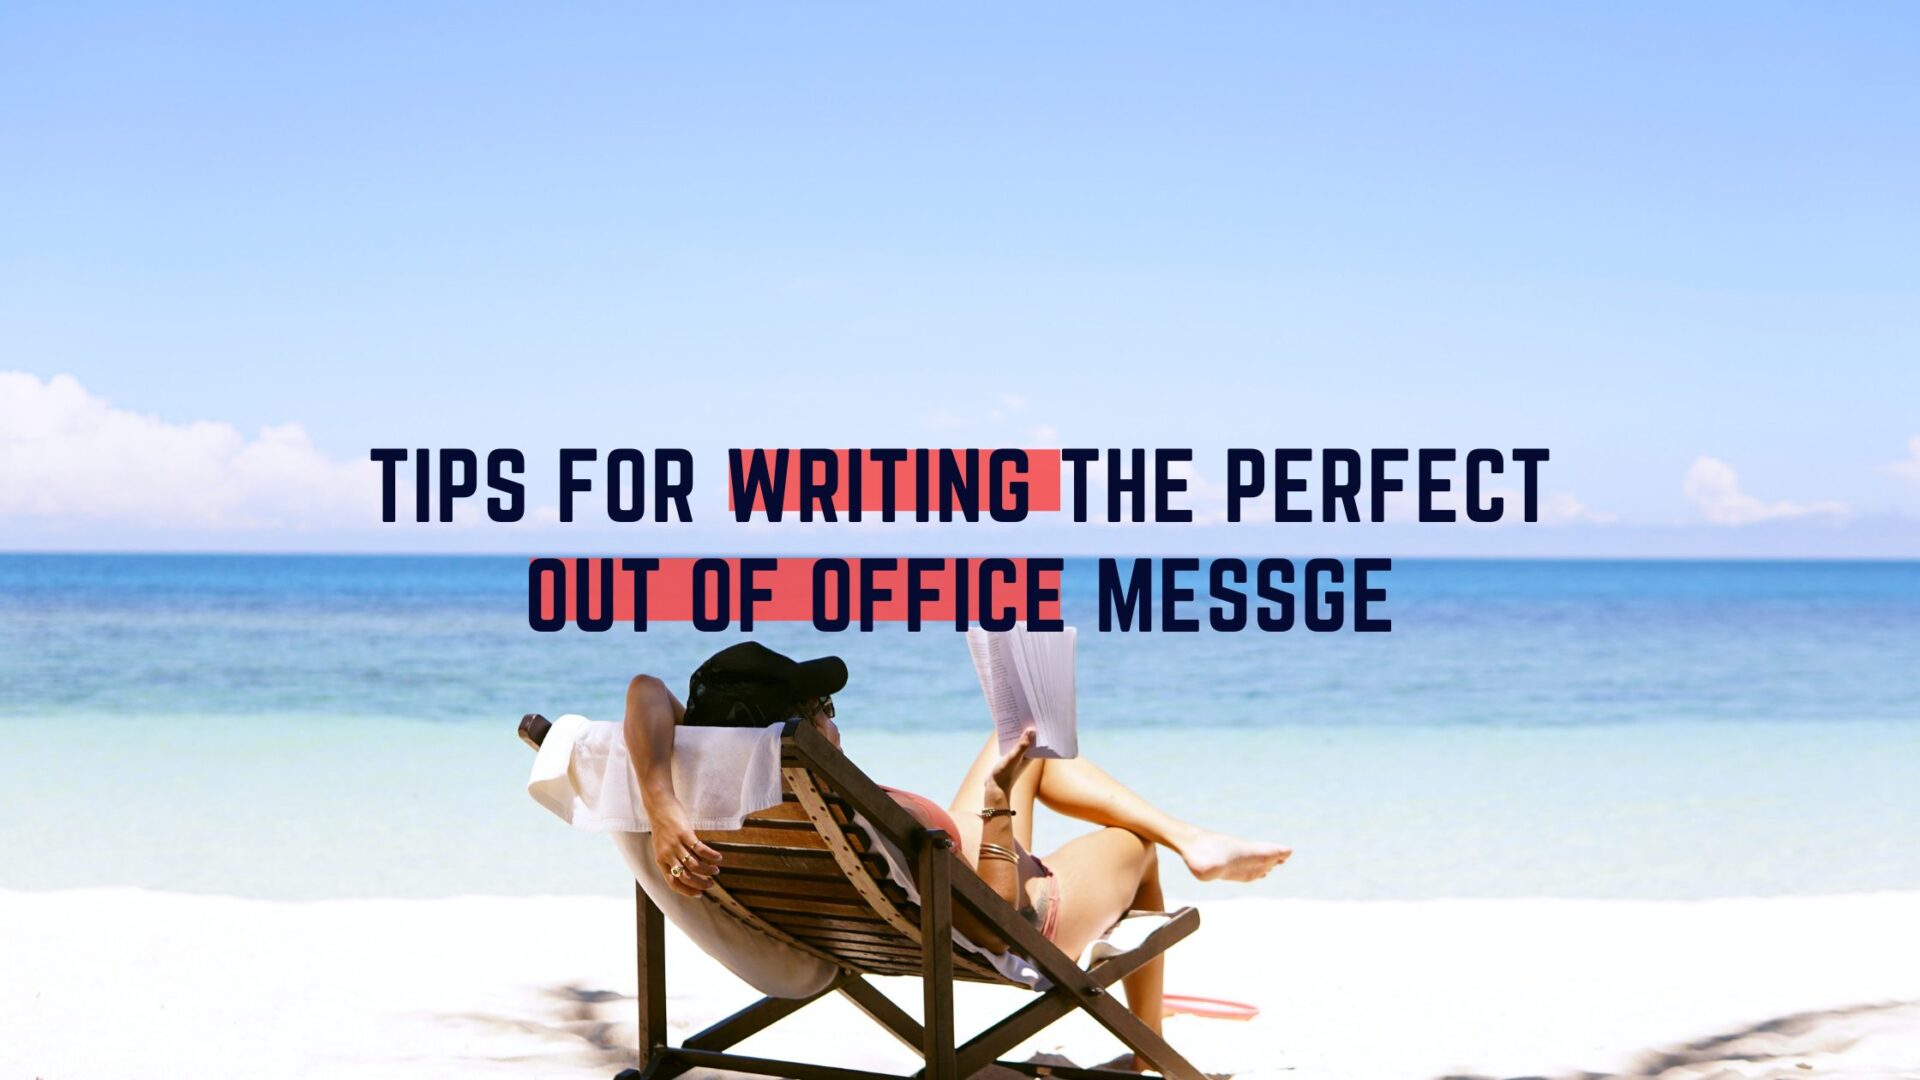 Out-of-office message examples